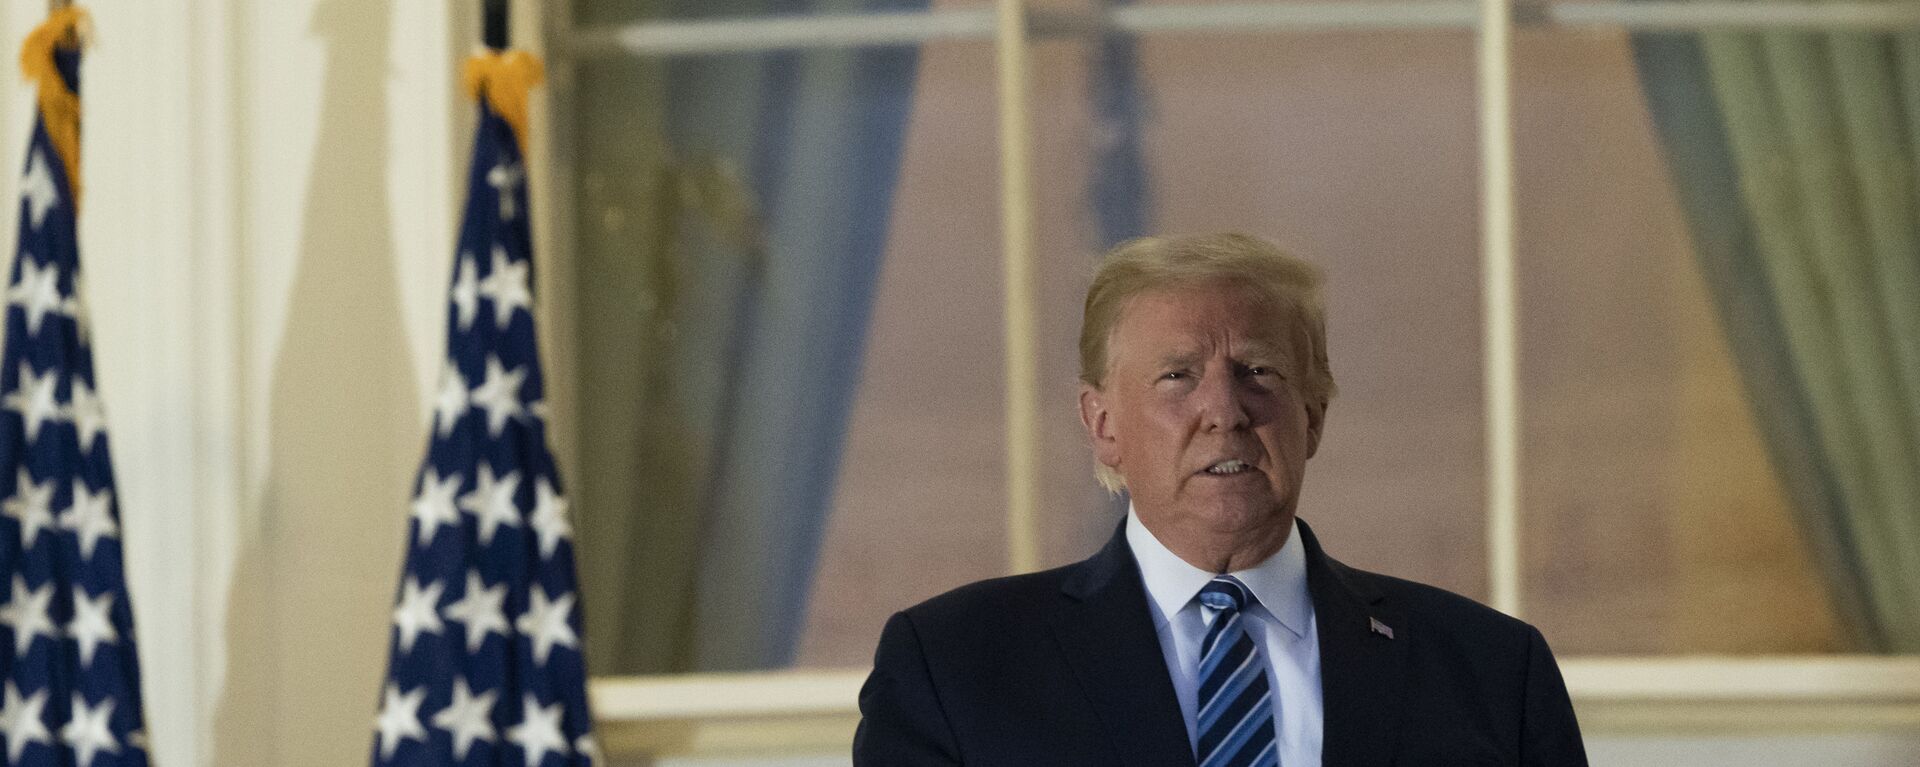 President Donald Trump removes his mask as he stands on the Blue Room Balcony upon returning to the White House on Monday, 5 October 2020, in Washington, after leaving Walter Reed National Military Medical Center, in Bethesda, MD. Trump announced he'd tested positive for COVID-19 on 2 October. - Sputnik International, 1920, 10.08.2021